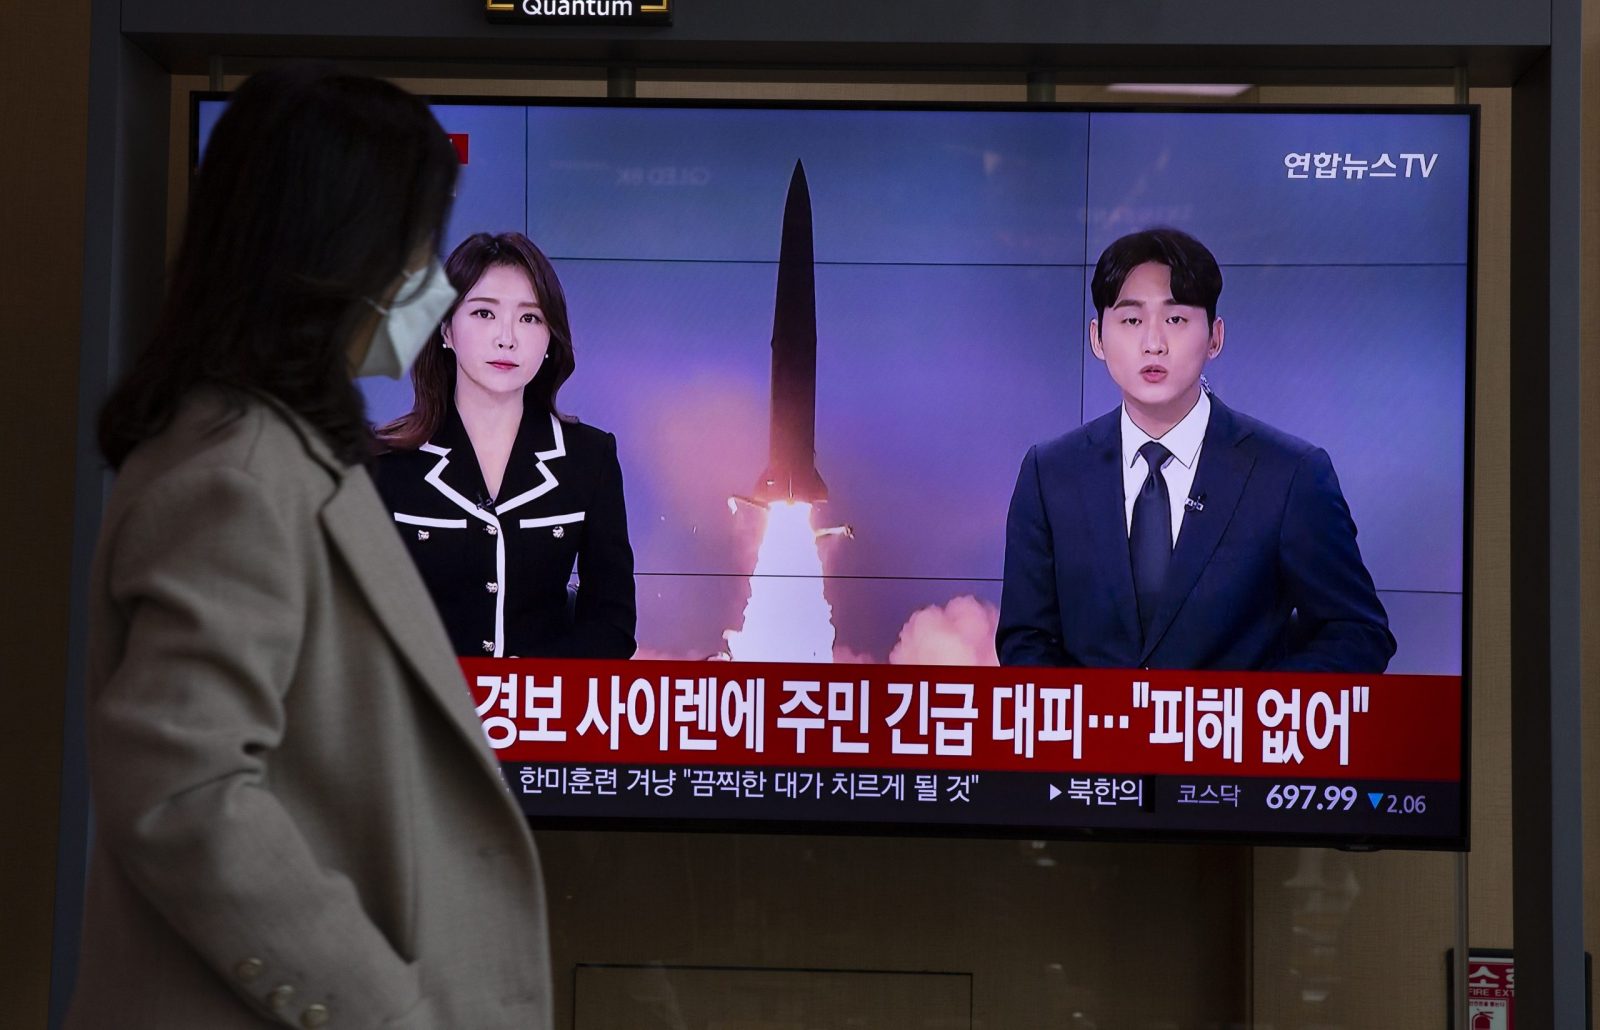 epa10280871 A woman watches the news at a station in Seoul, South Korea, 02 November 2022. According to South Korea's Joint Chiefs of Staff (JCS), North Korea launched at least three short-range ballistic missiles (SRBMs) into the East Sea, one of which flew across its de facto maritime border with South Korea.  EPA/JEON HEON-KYUN